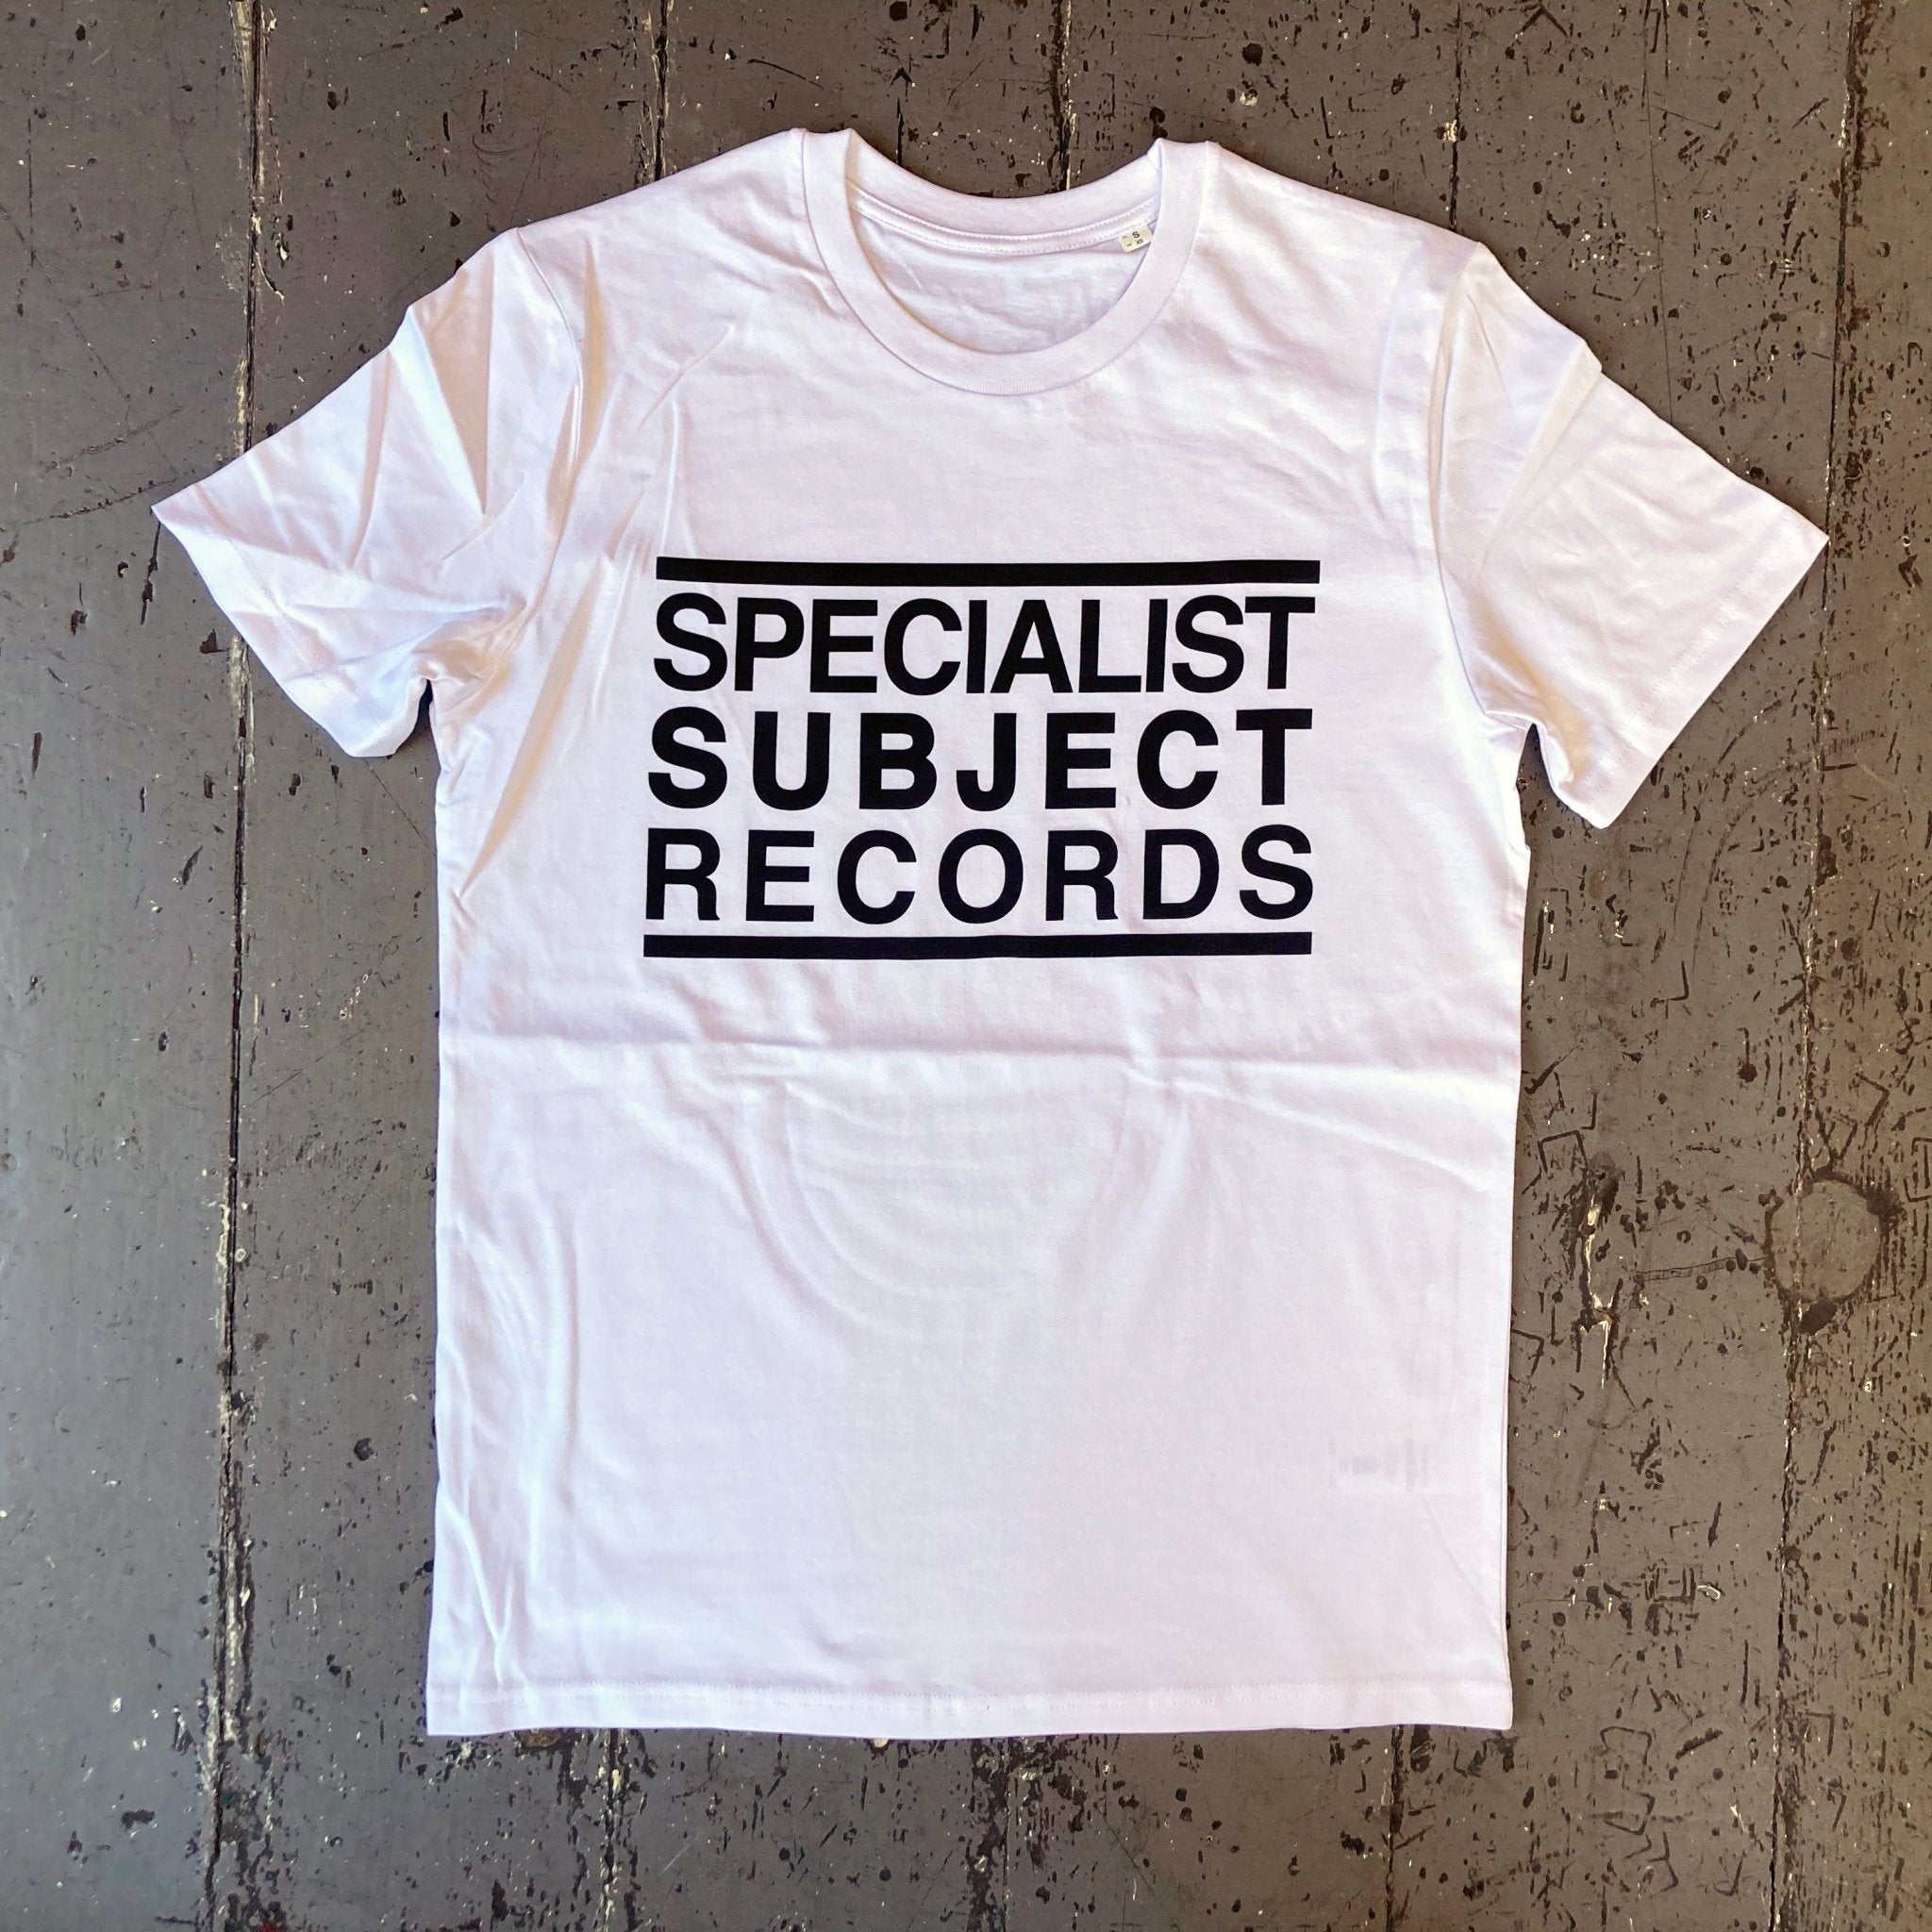 Specialist Subject - White Logo T-shirt - Merch - Specialist Subject Records